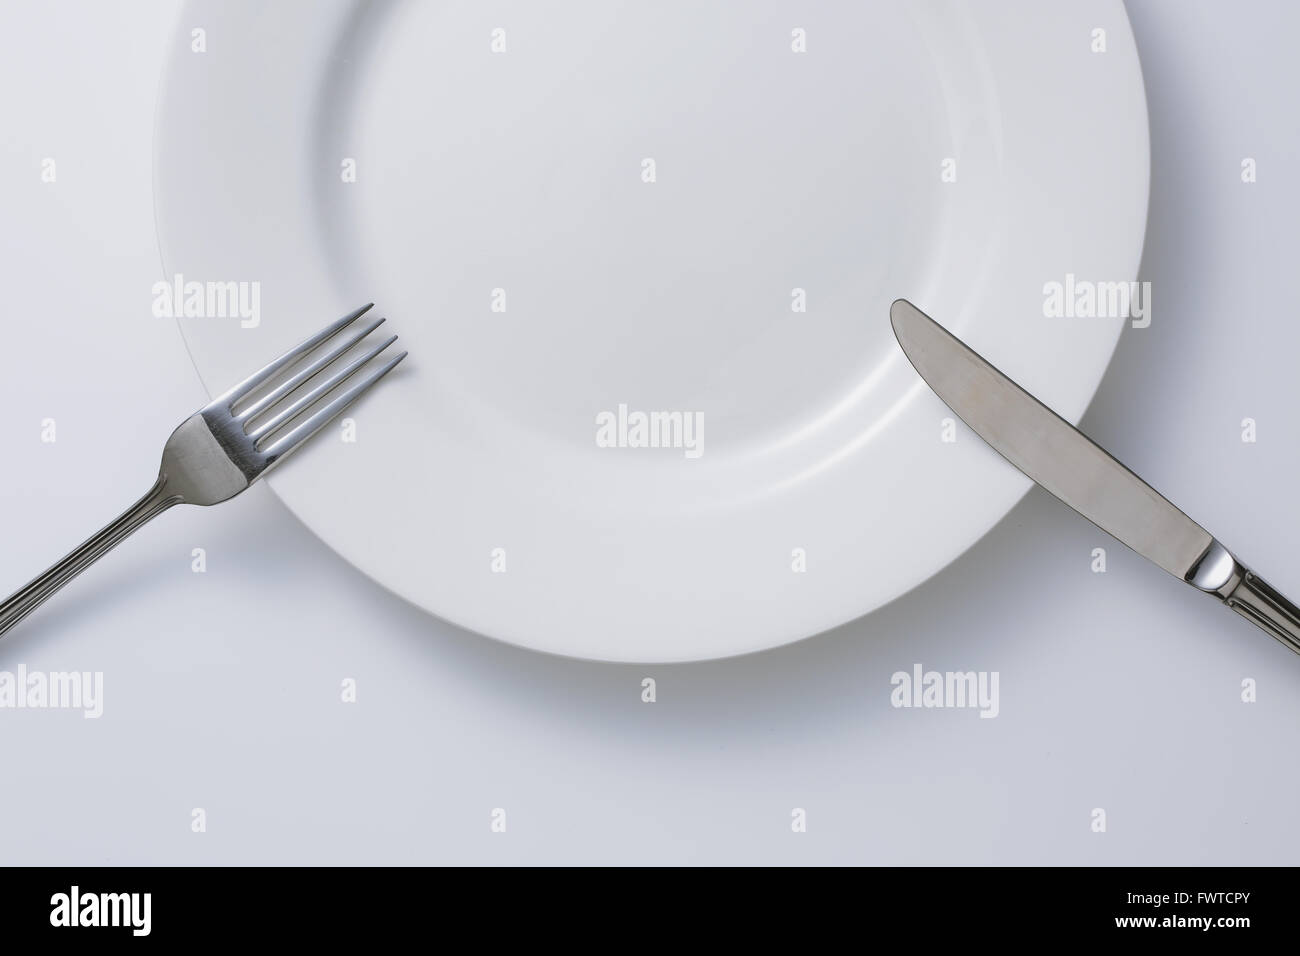 Empty plate and cutlery Stock Photo